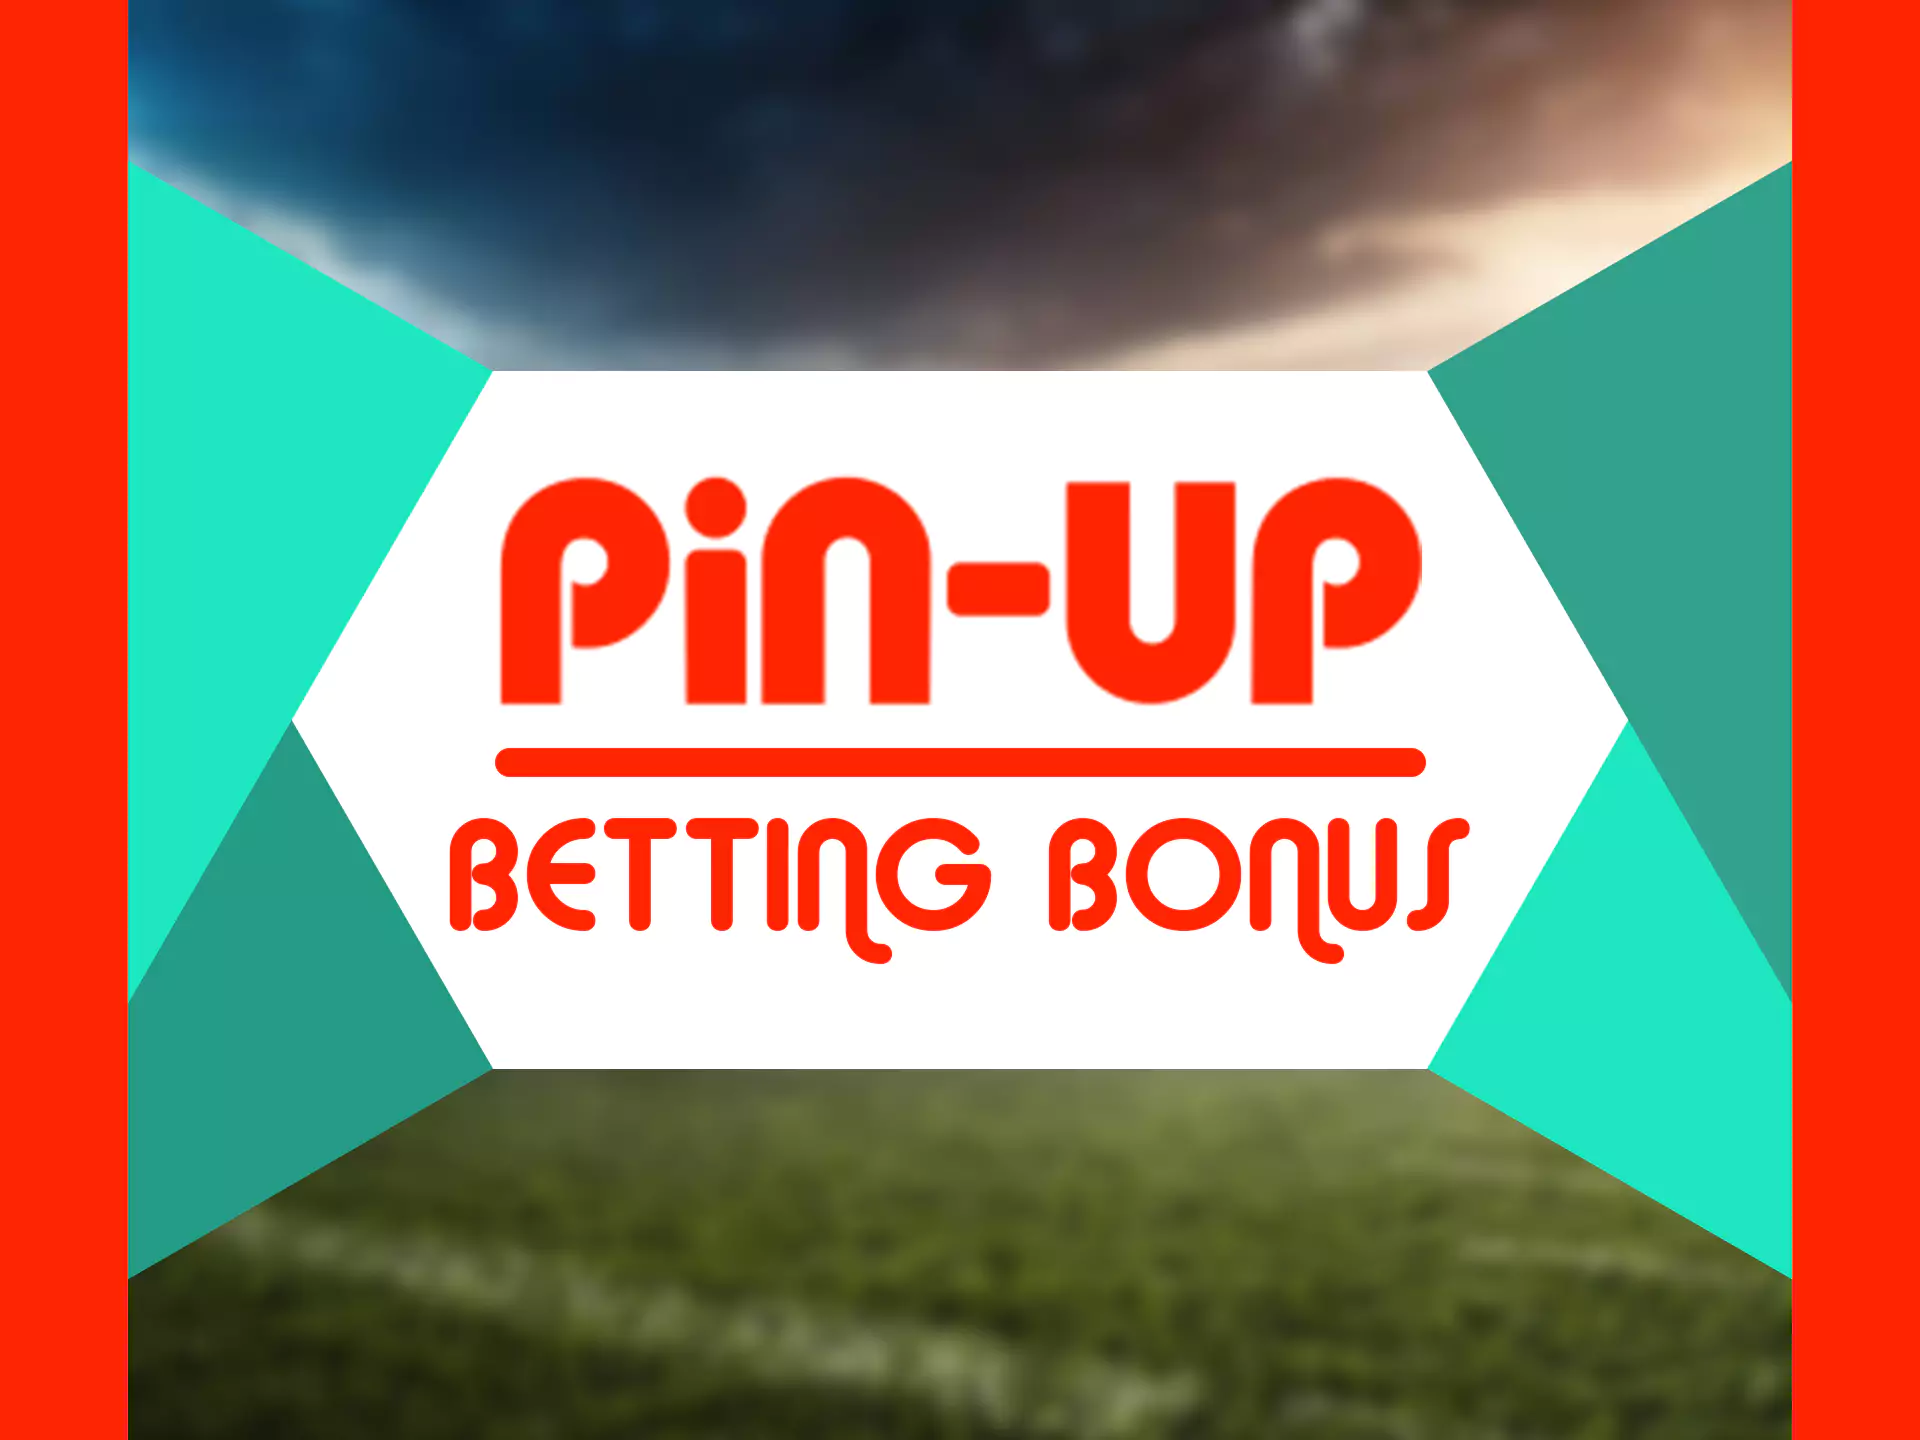 Get a welcome bonus on your bets.